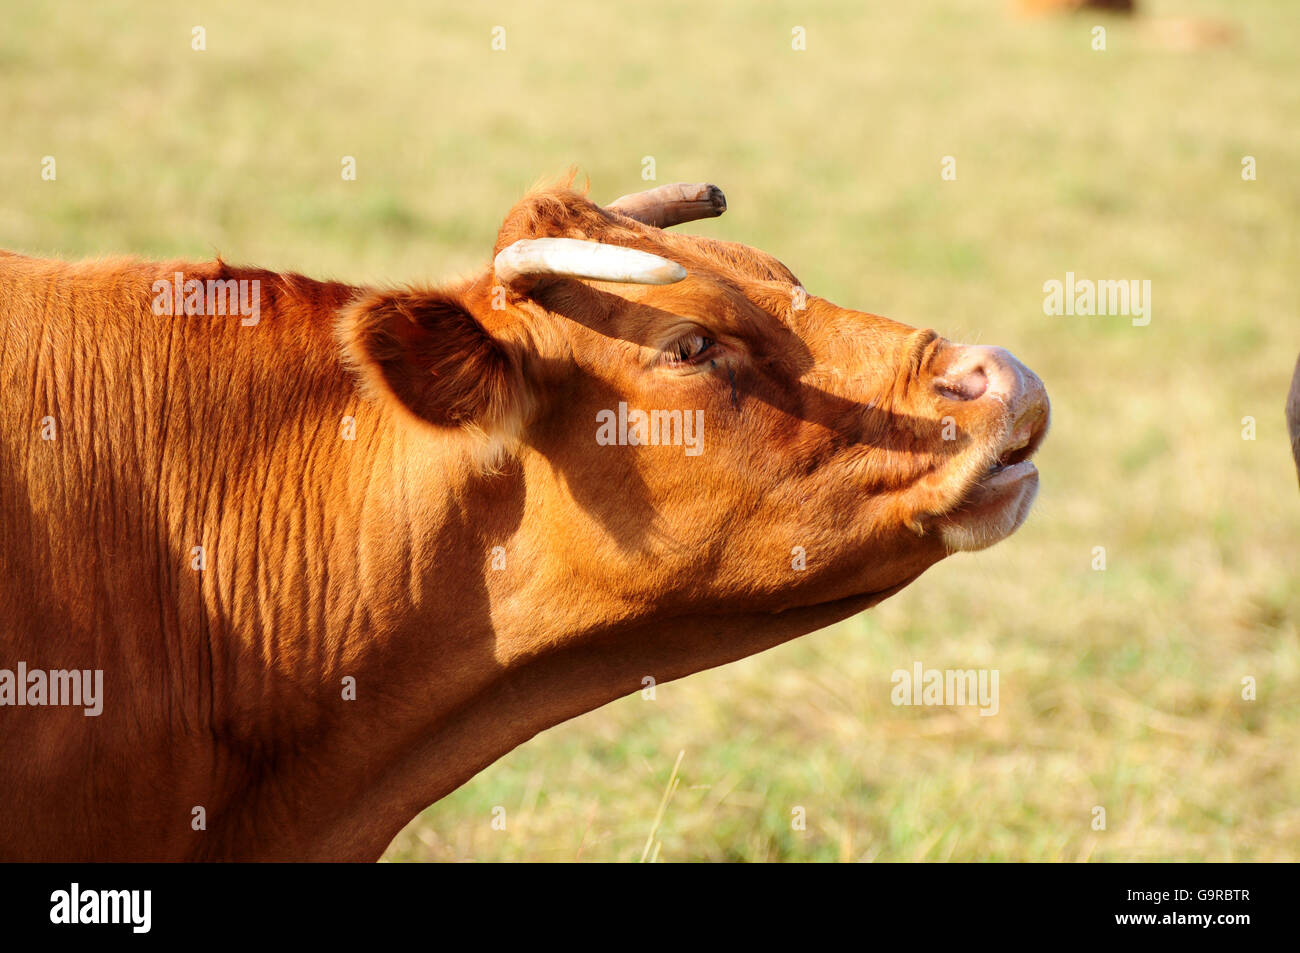 Limousin Cattle / suckler cow husbandry Stock Photo